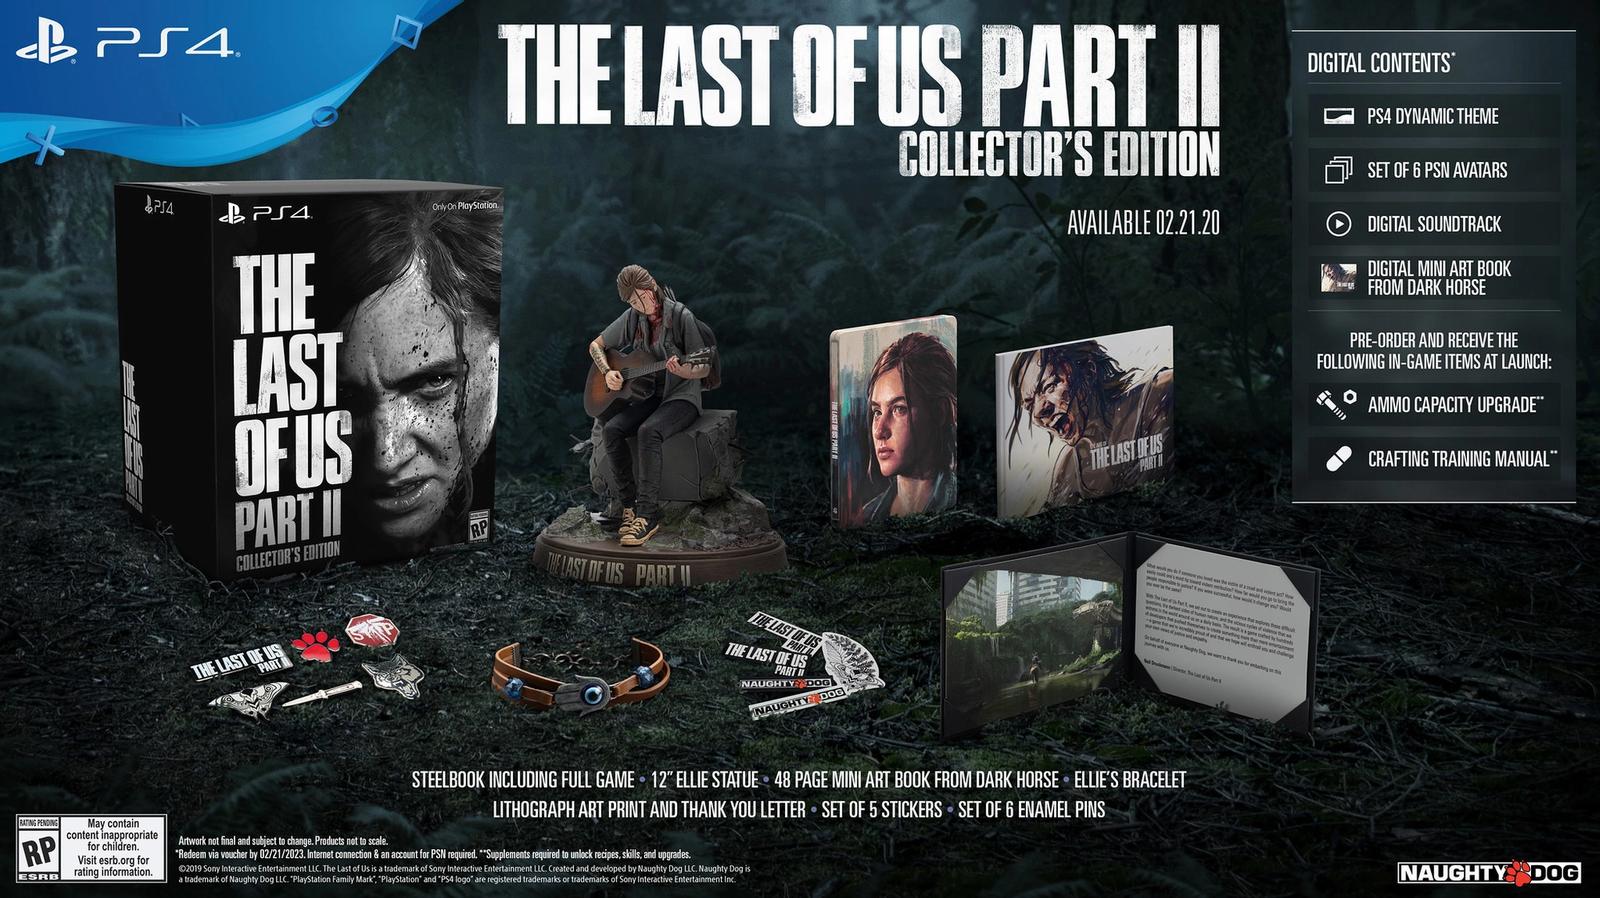 A fully loaded collectors edition for The Last of Us Part II